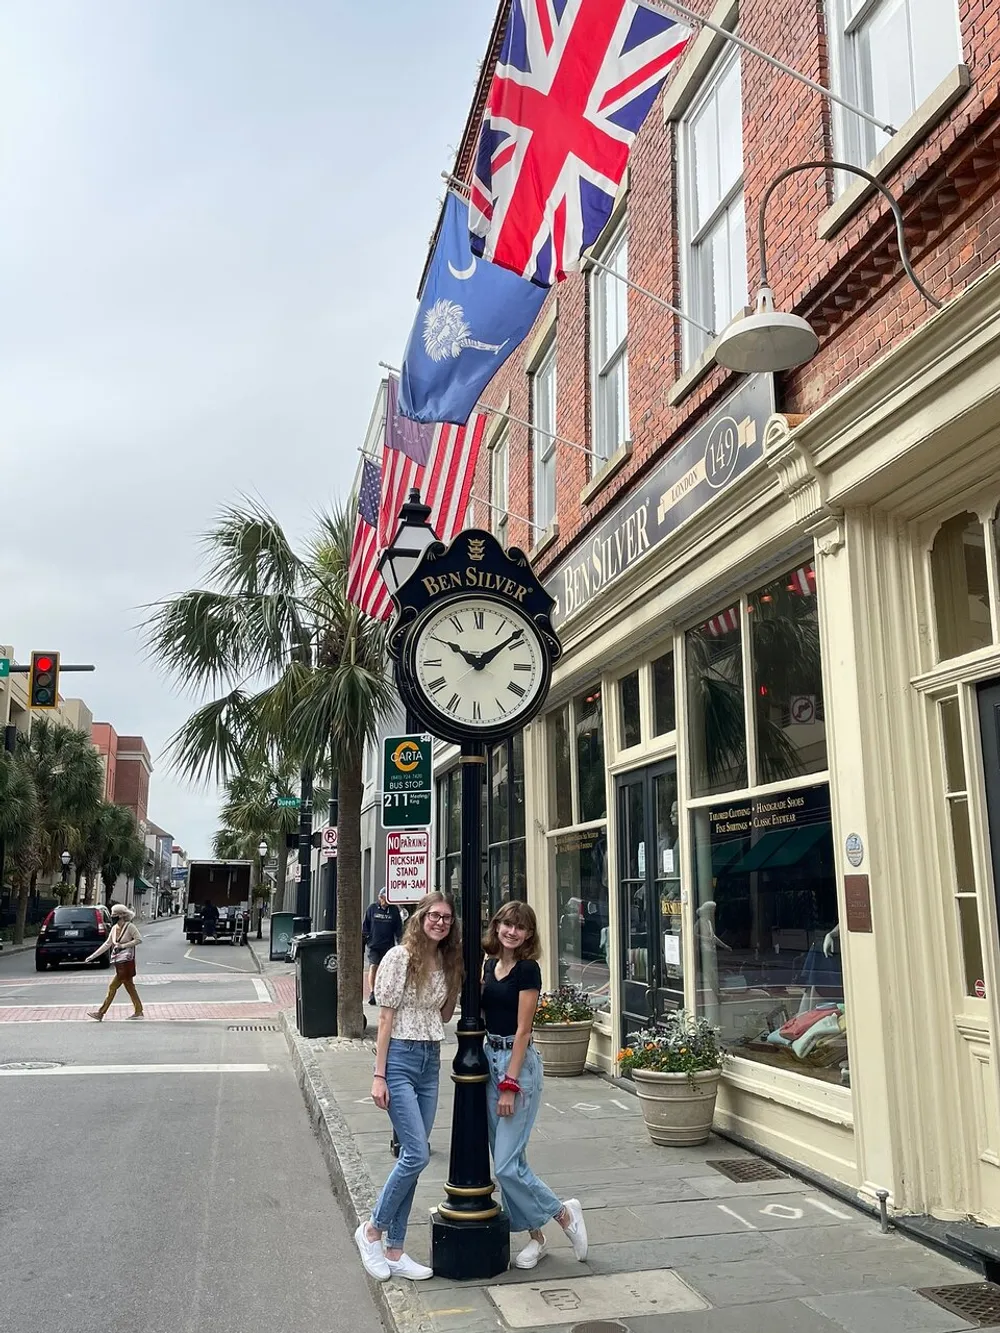 Two individuals are smiling and posing in front of a clock post on a sidewalk with flags hanging above them and a store named Ben Silver in the background